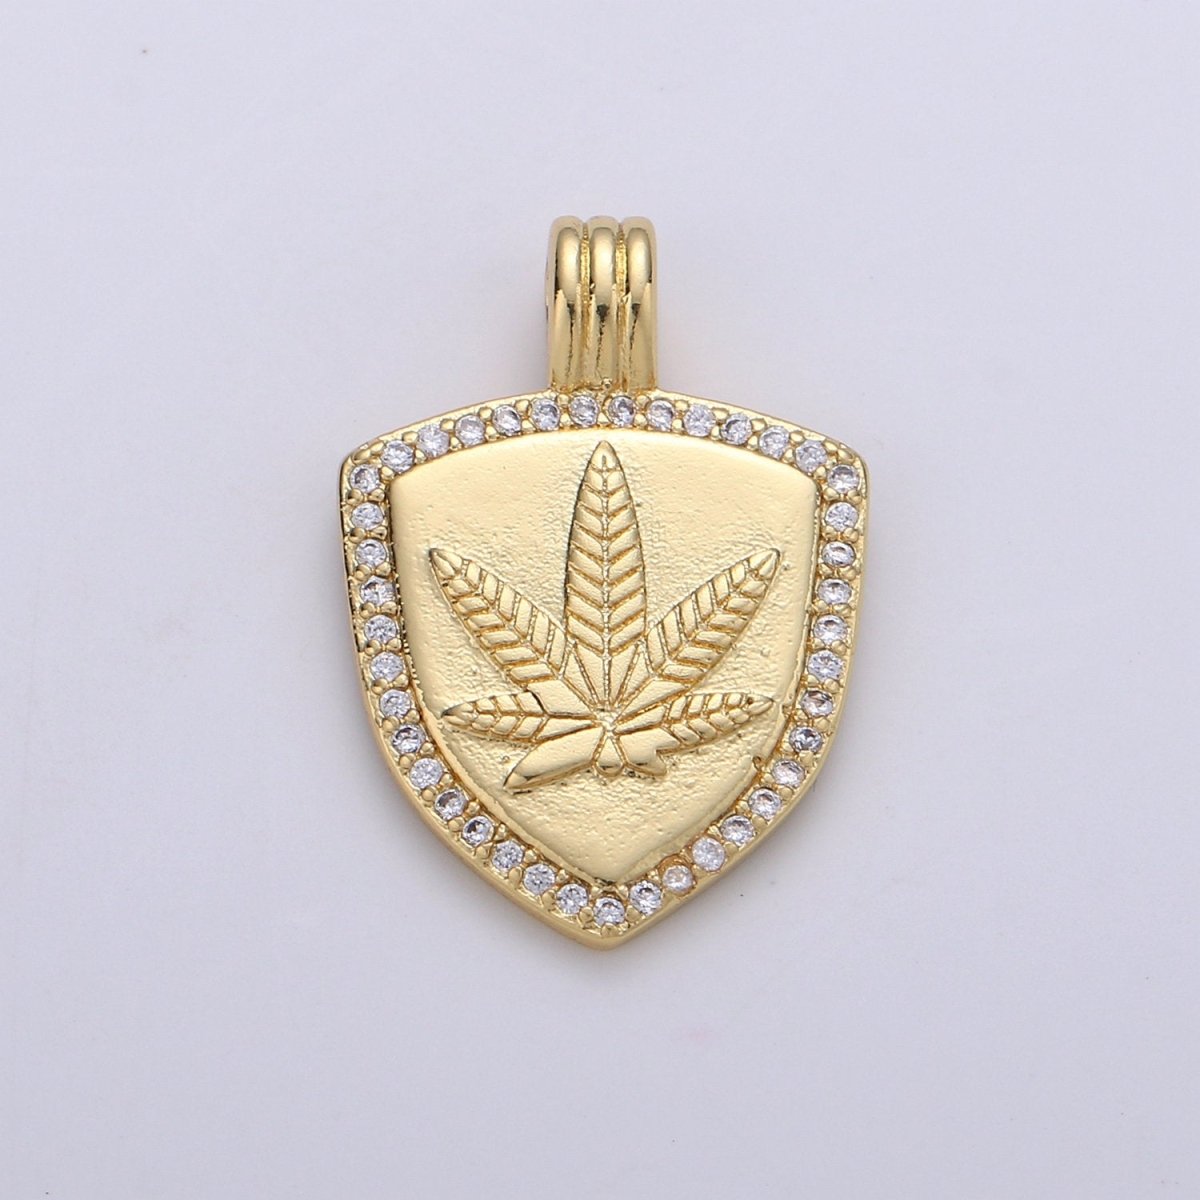 Dainty 14k Gold Filled Shield Charm, Cz Shield pendant, Micro Pave Weed Pendant Protection Jewelry Supply I-931 - DLUXCA